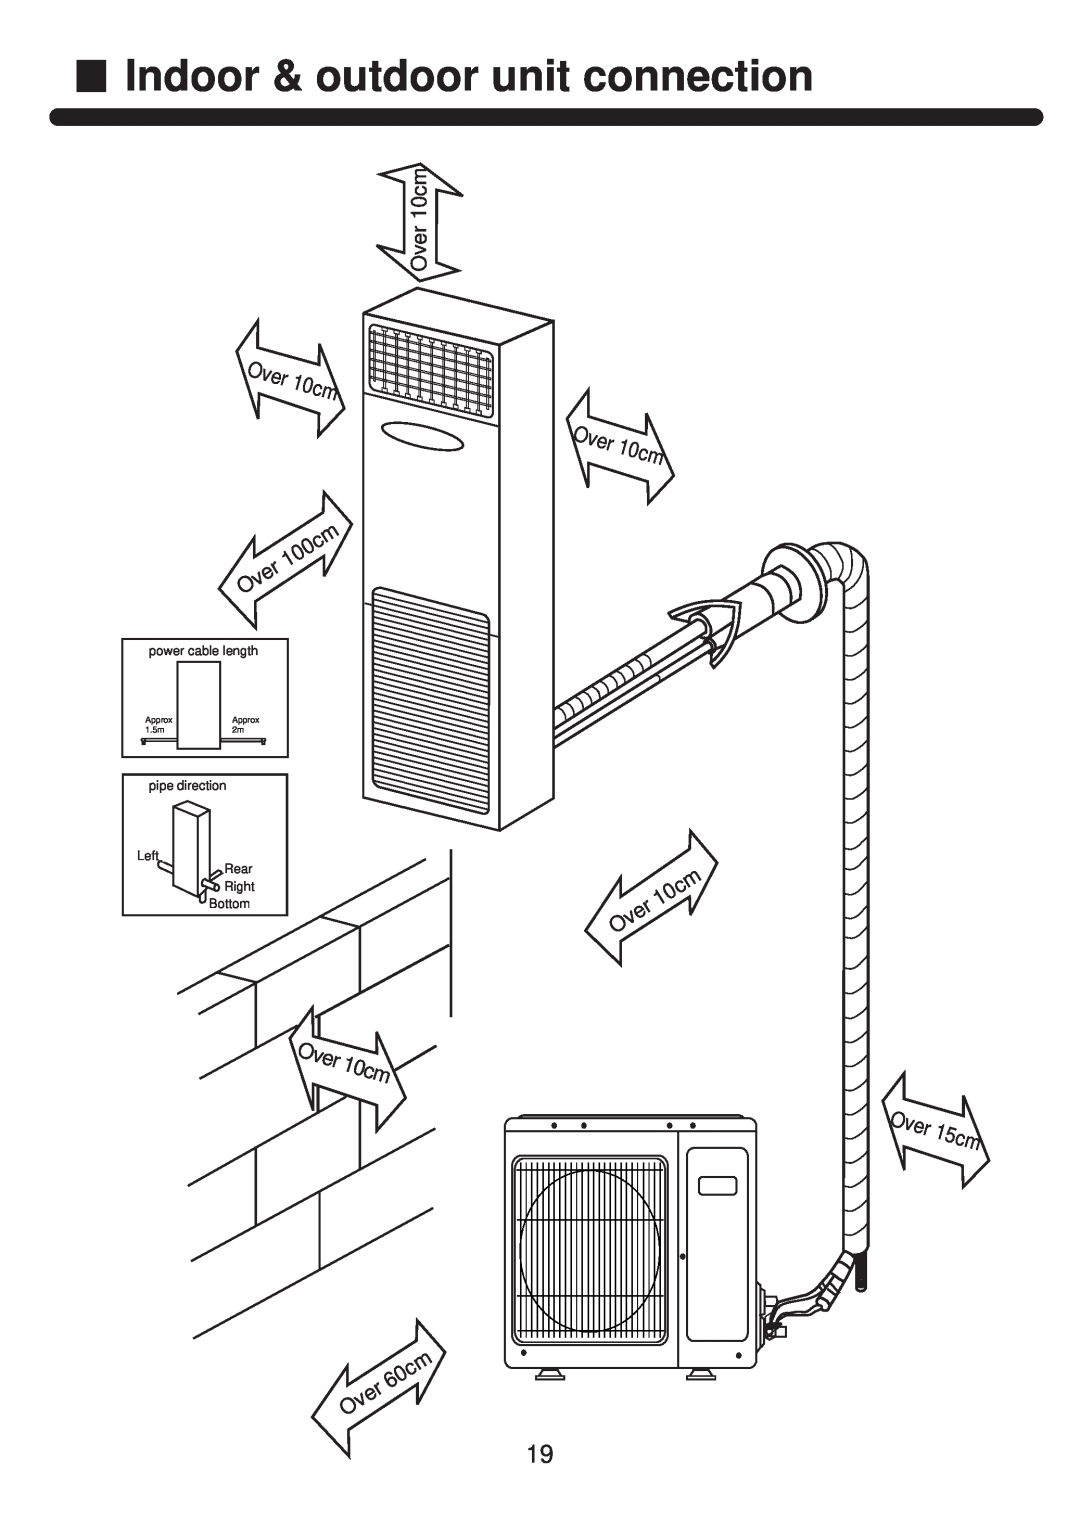 Haier HPU-42CF03 operation manual Indoor & outdoor unit connection, Over 10cm, Over 15cm, Approx, 1.5m 